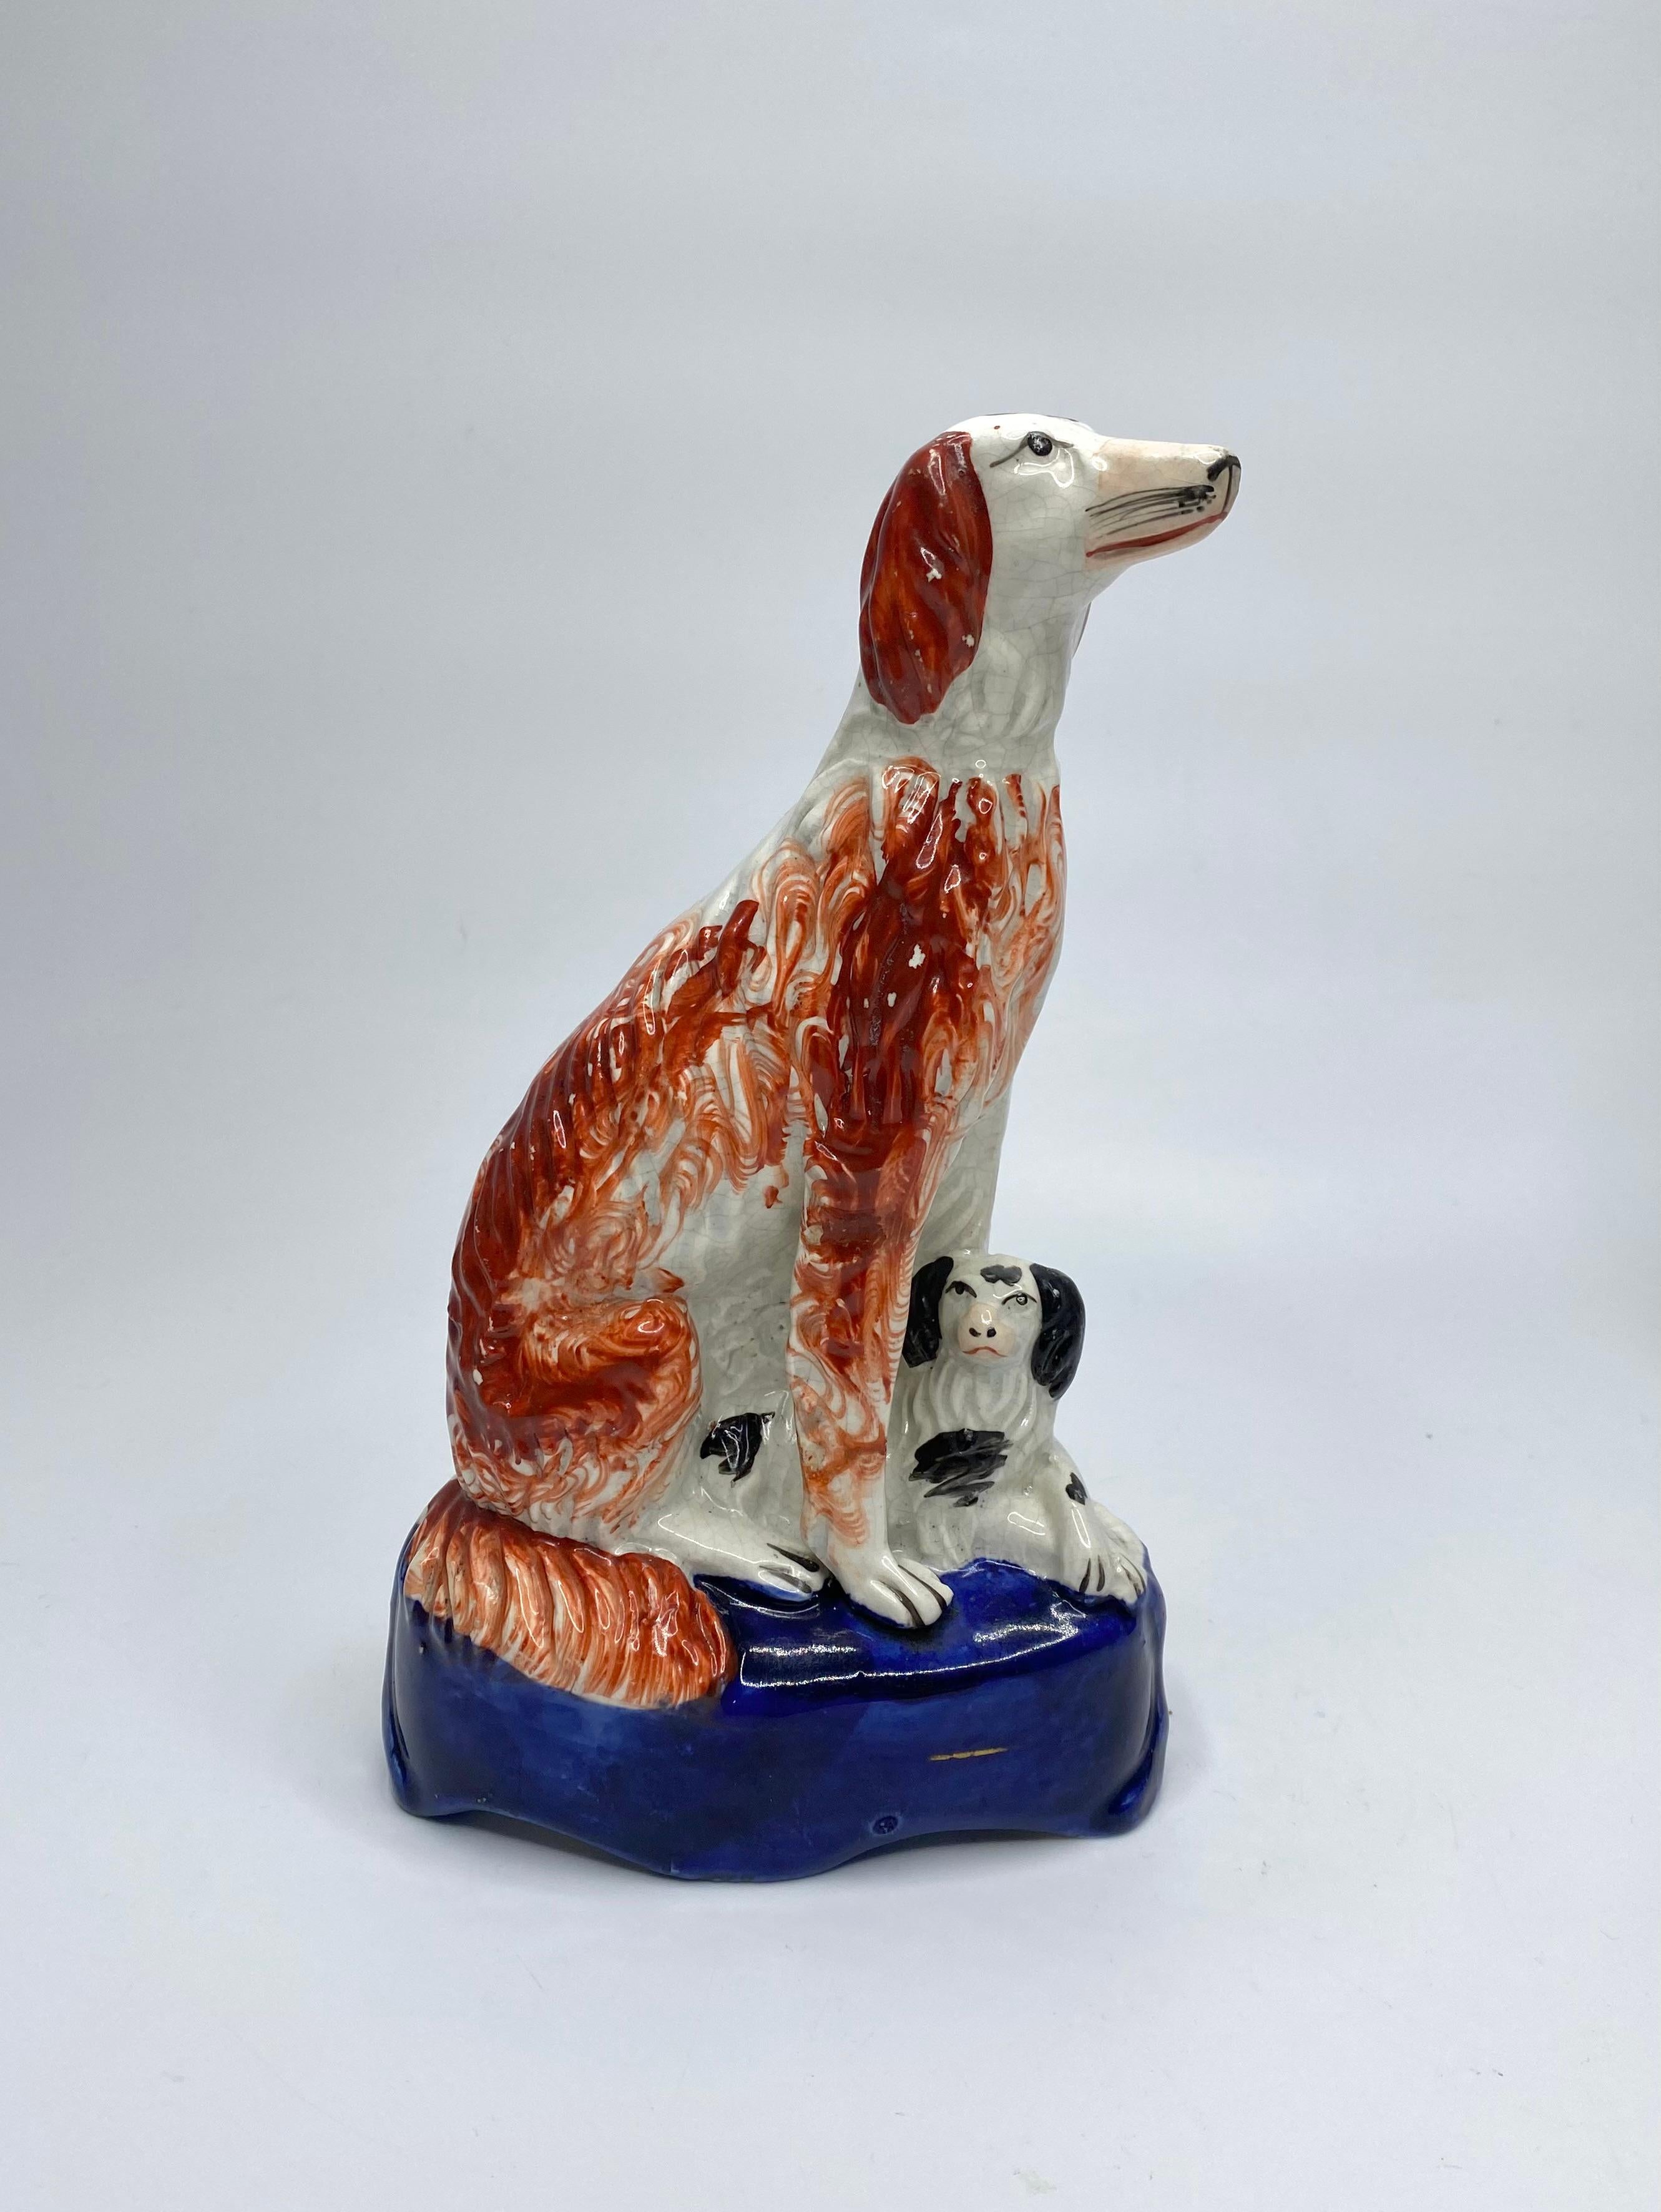 A pair of Staffordshire pottery Irish Setters, and puppies, c. 1850. Elegantly modelled as two tall, seated Irish Setters, their hair well delineated, and painted with liver red spots, feathered at the edges. They sit, with recumbent puppies at